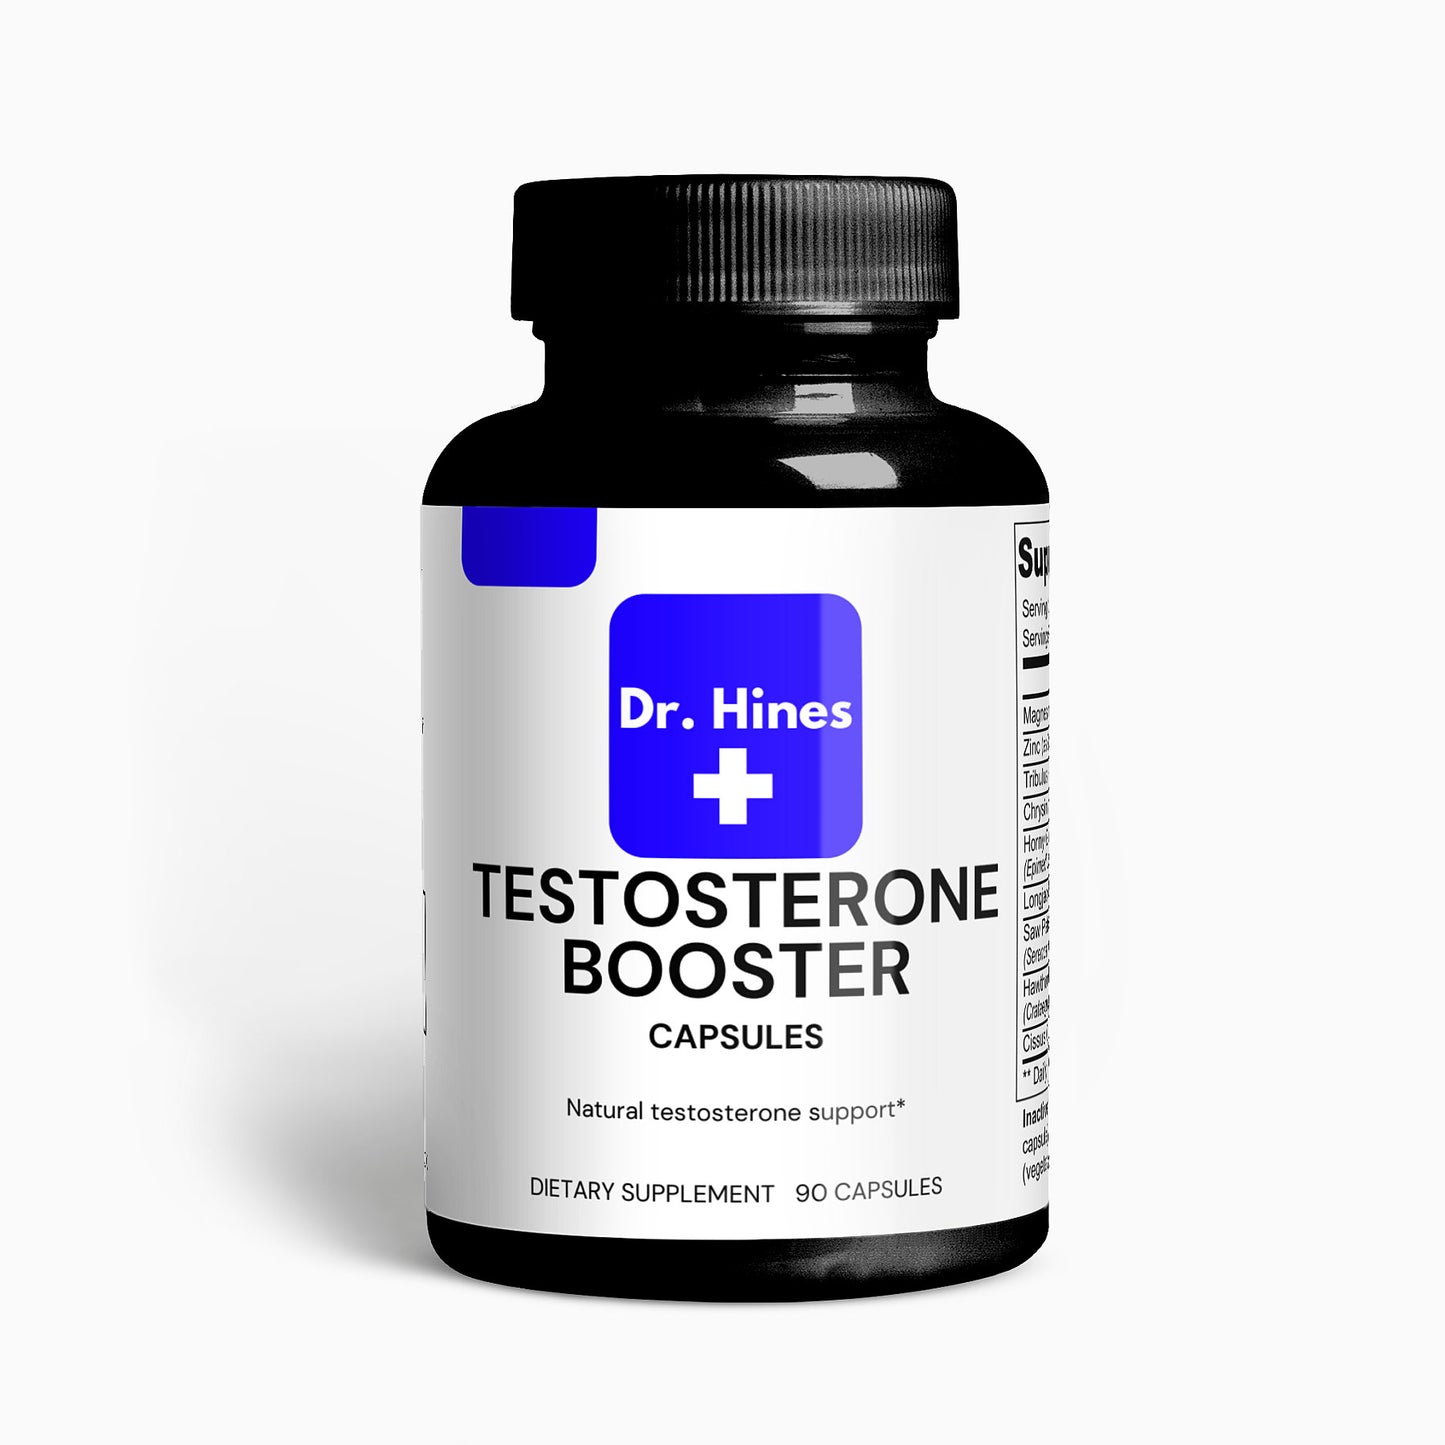 Dr. Hines Testosterone Booster